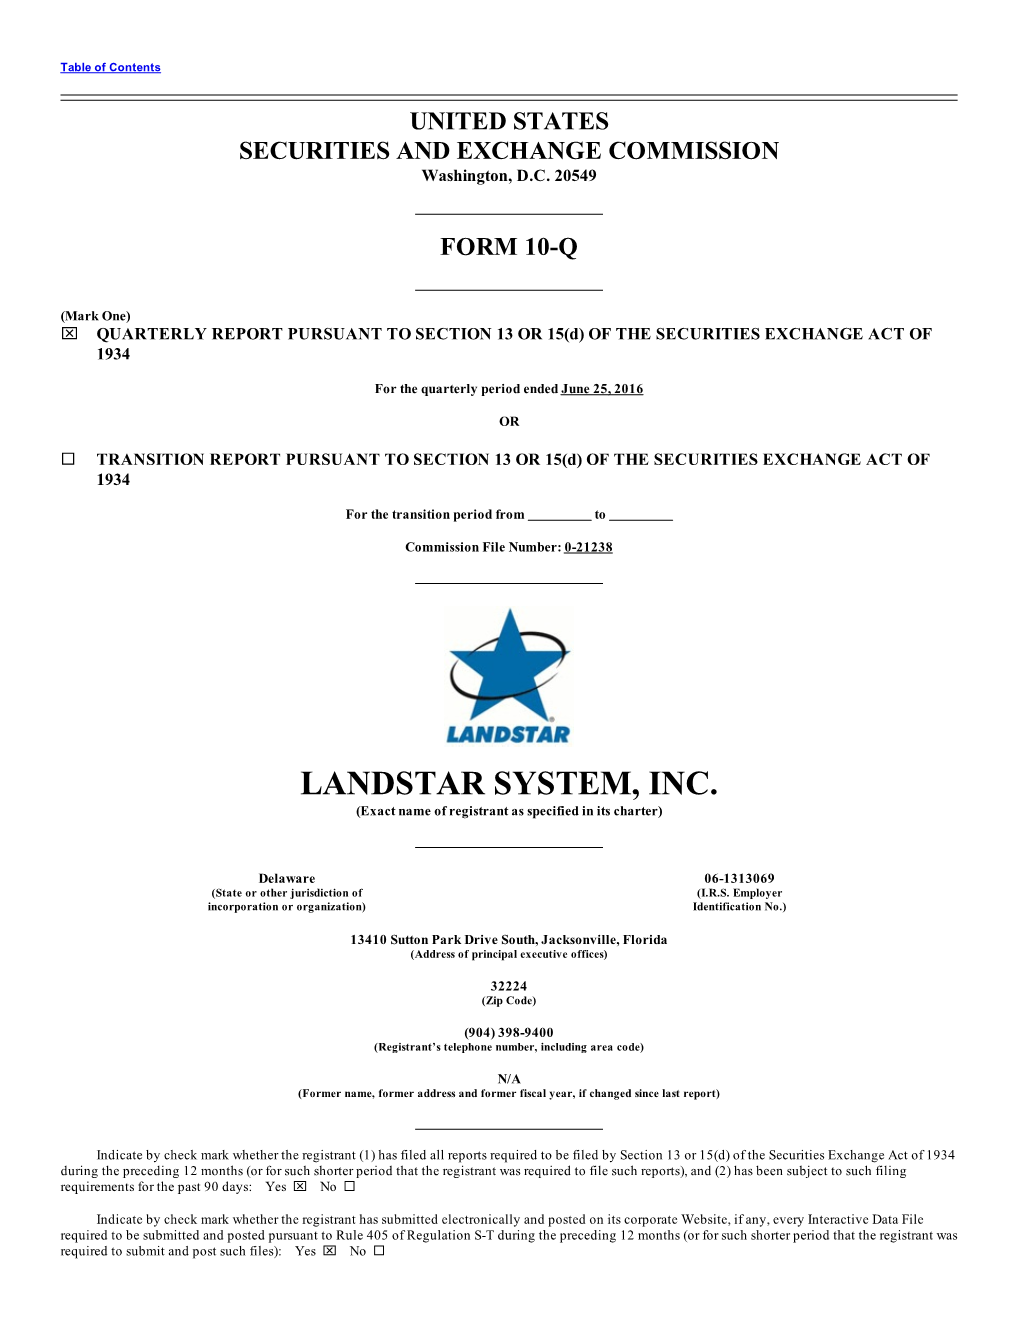 LANDSTAR SYSTEM, INC. (Exact Name of Registrant As Specified in Its Charter)